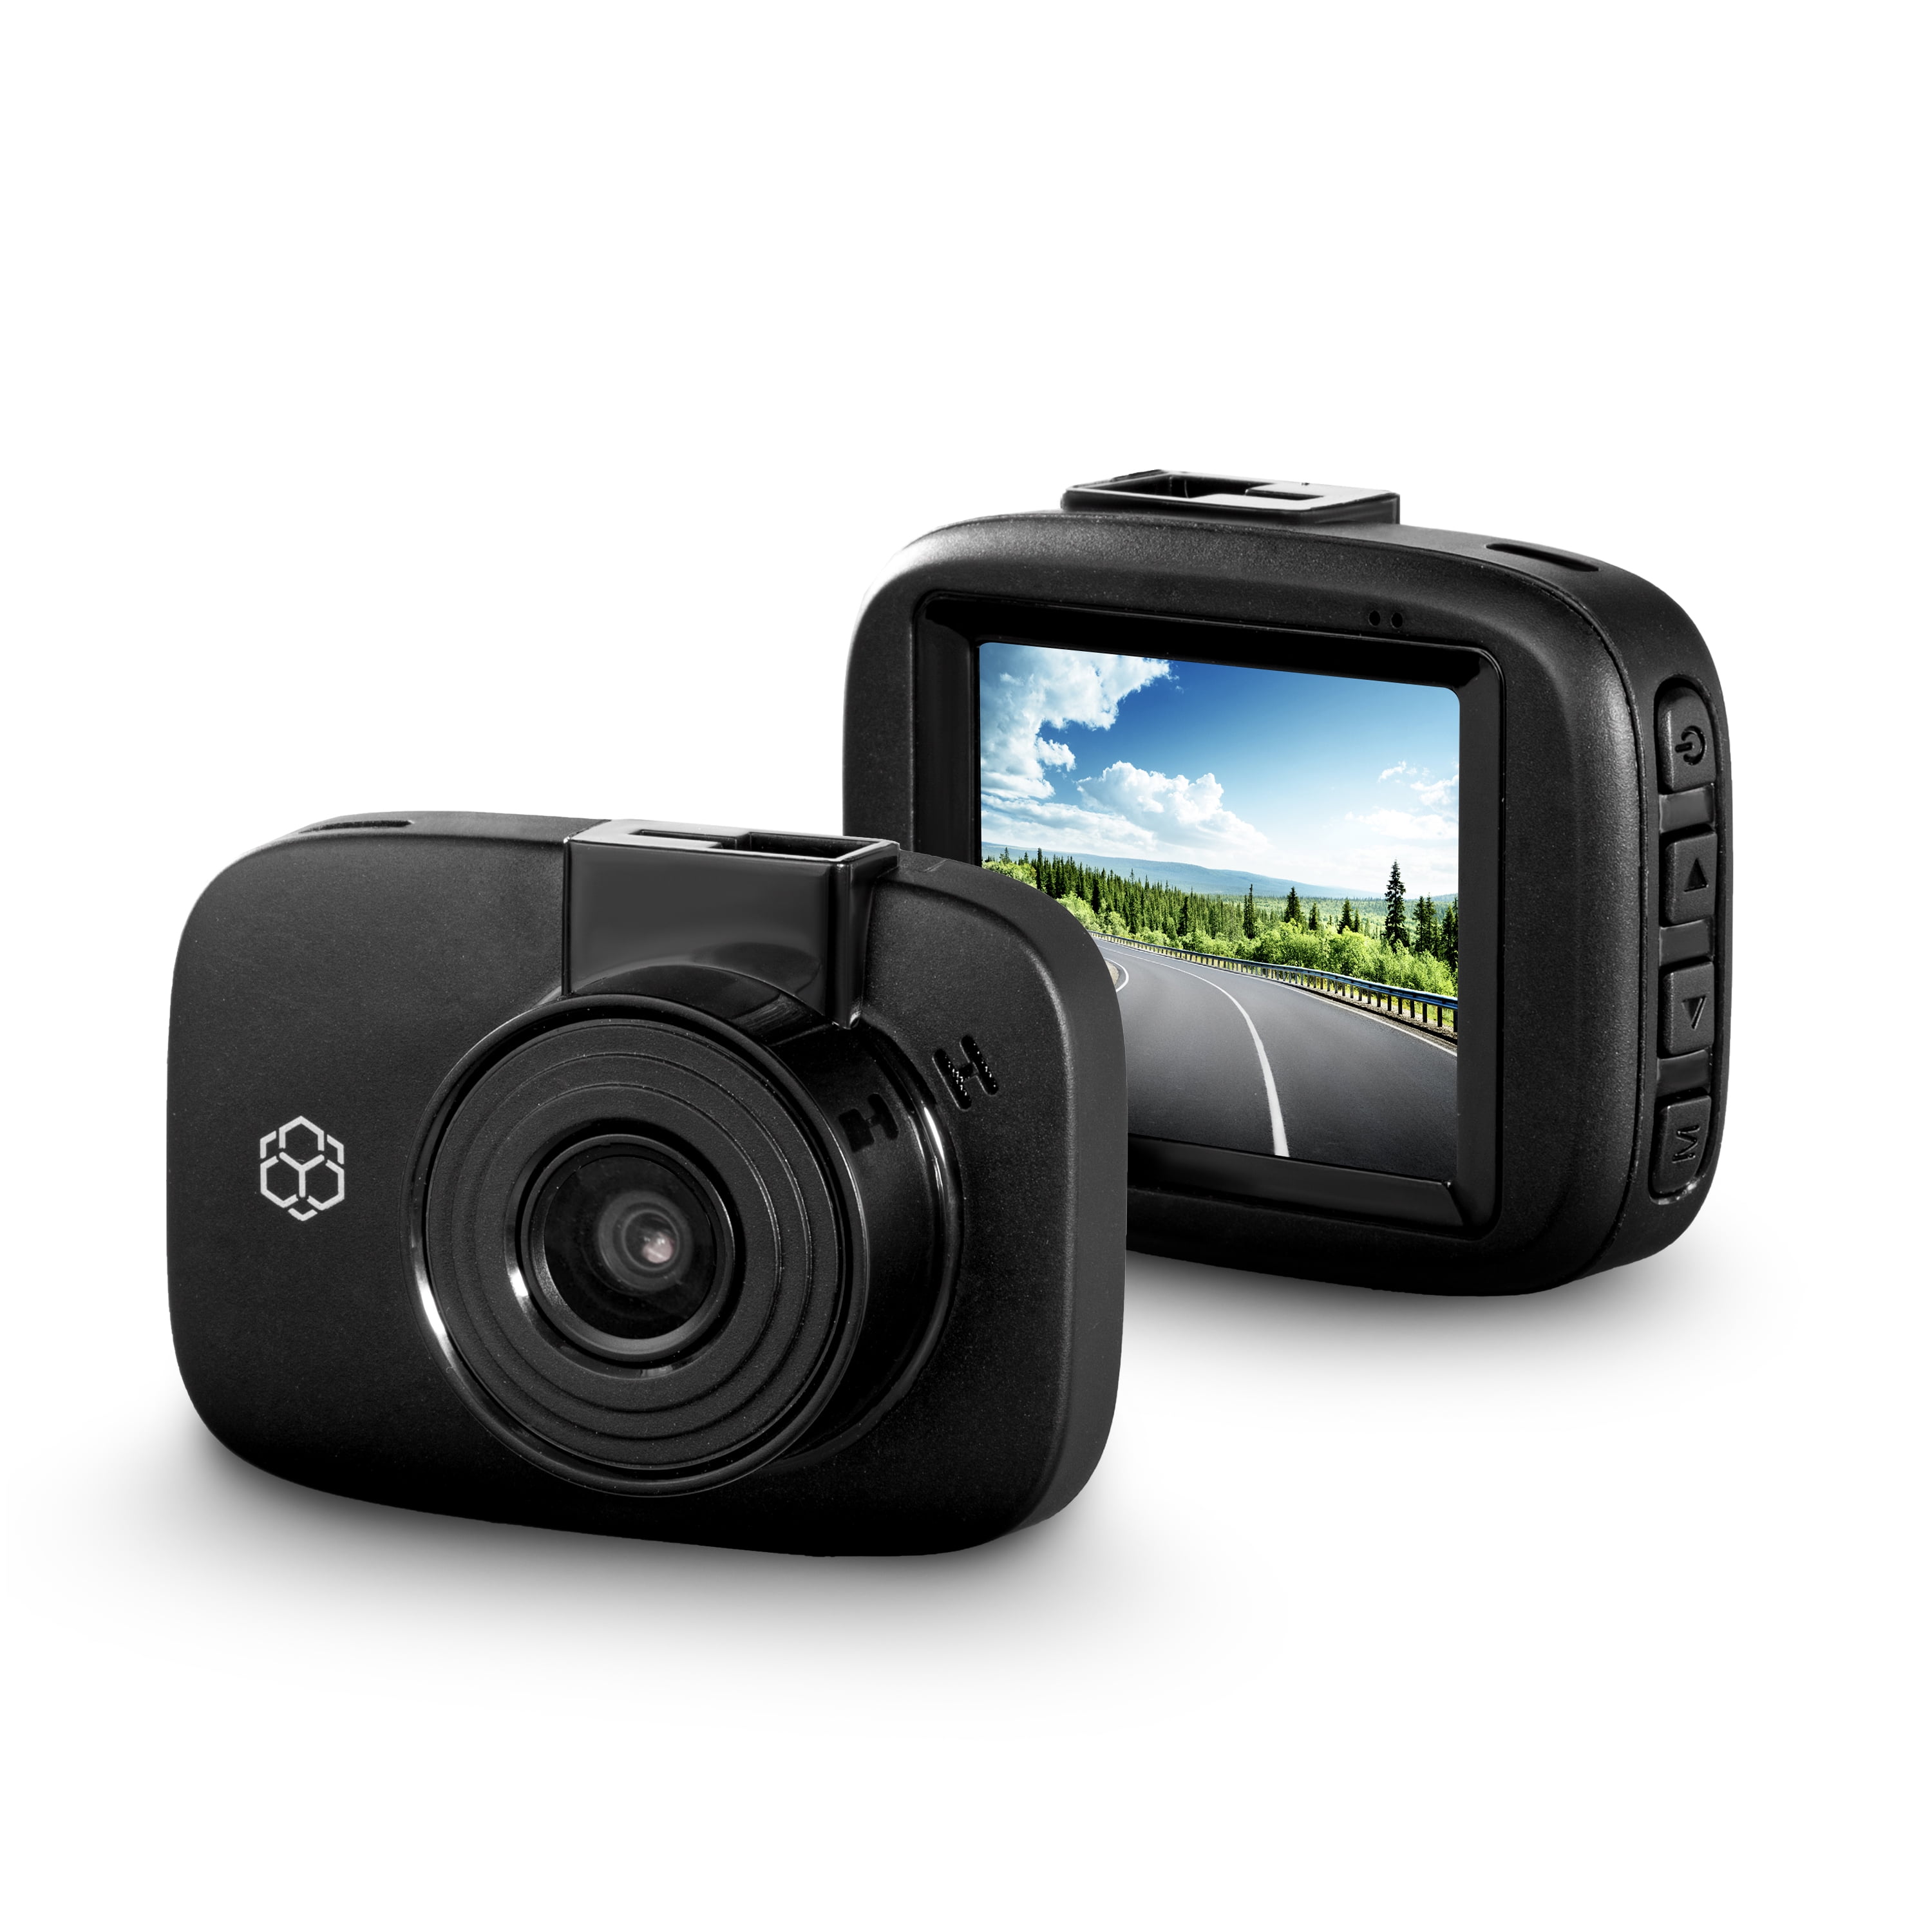 YADA 1080p Roadcam 120 Degree Wide Angle Lense, 2.2 LCD screen, G-Sensor  Technology with Park and Record Mode, Loop Recording 